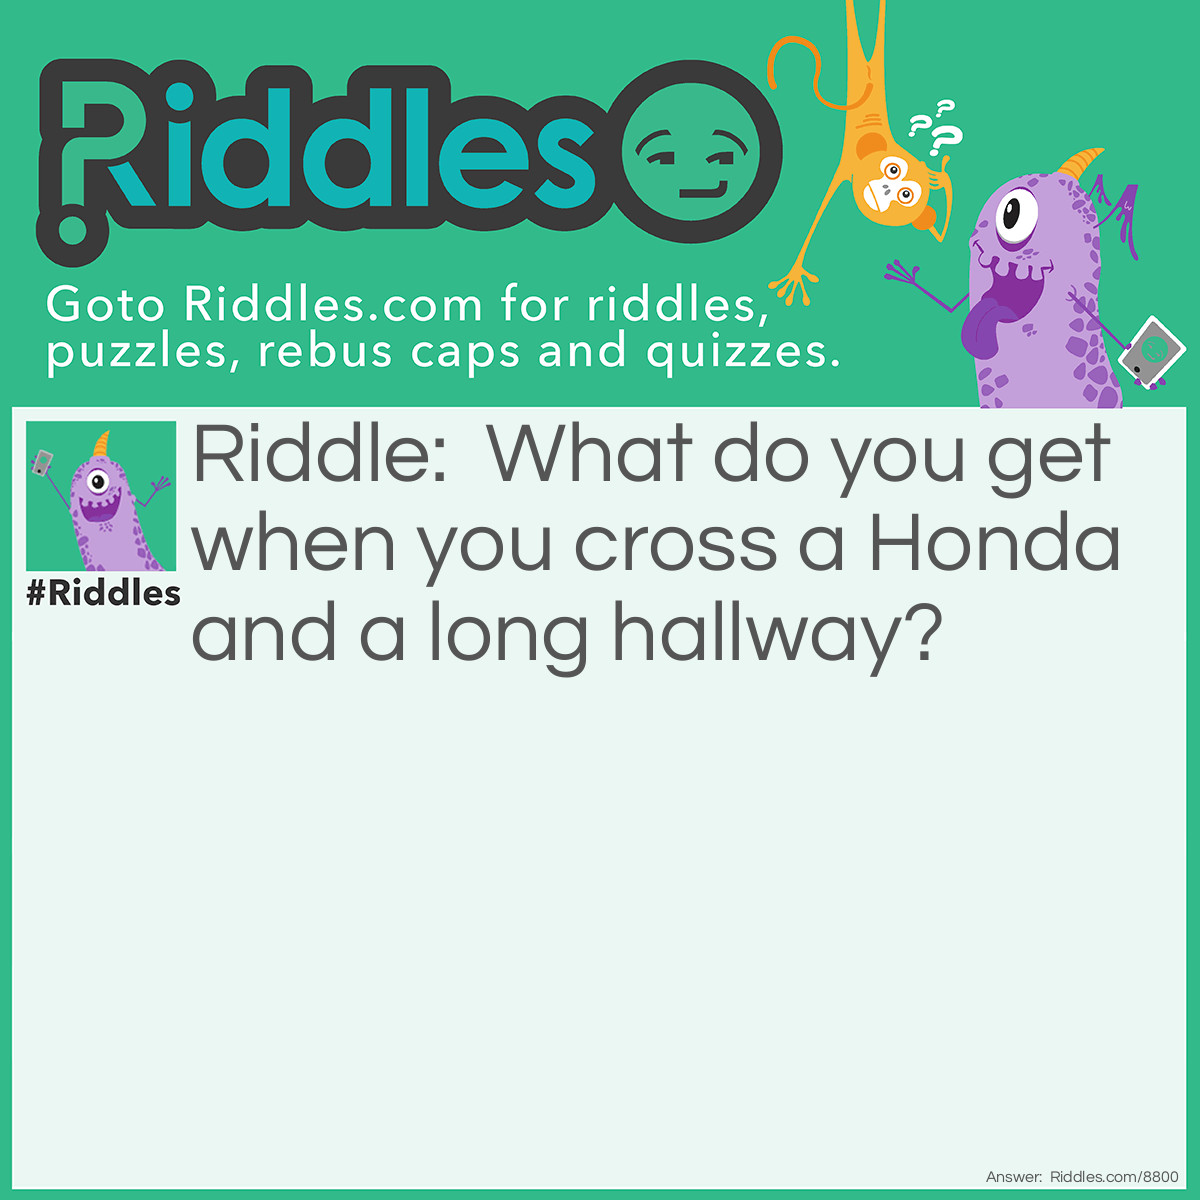 Riddle: What do you get when you cross a Honda and a long hallway? Answer: Carridor.